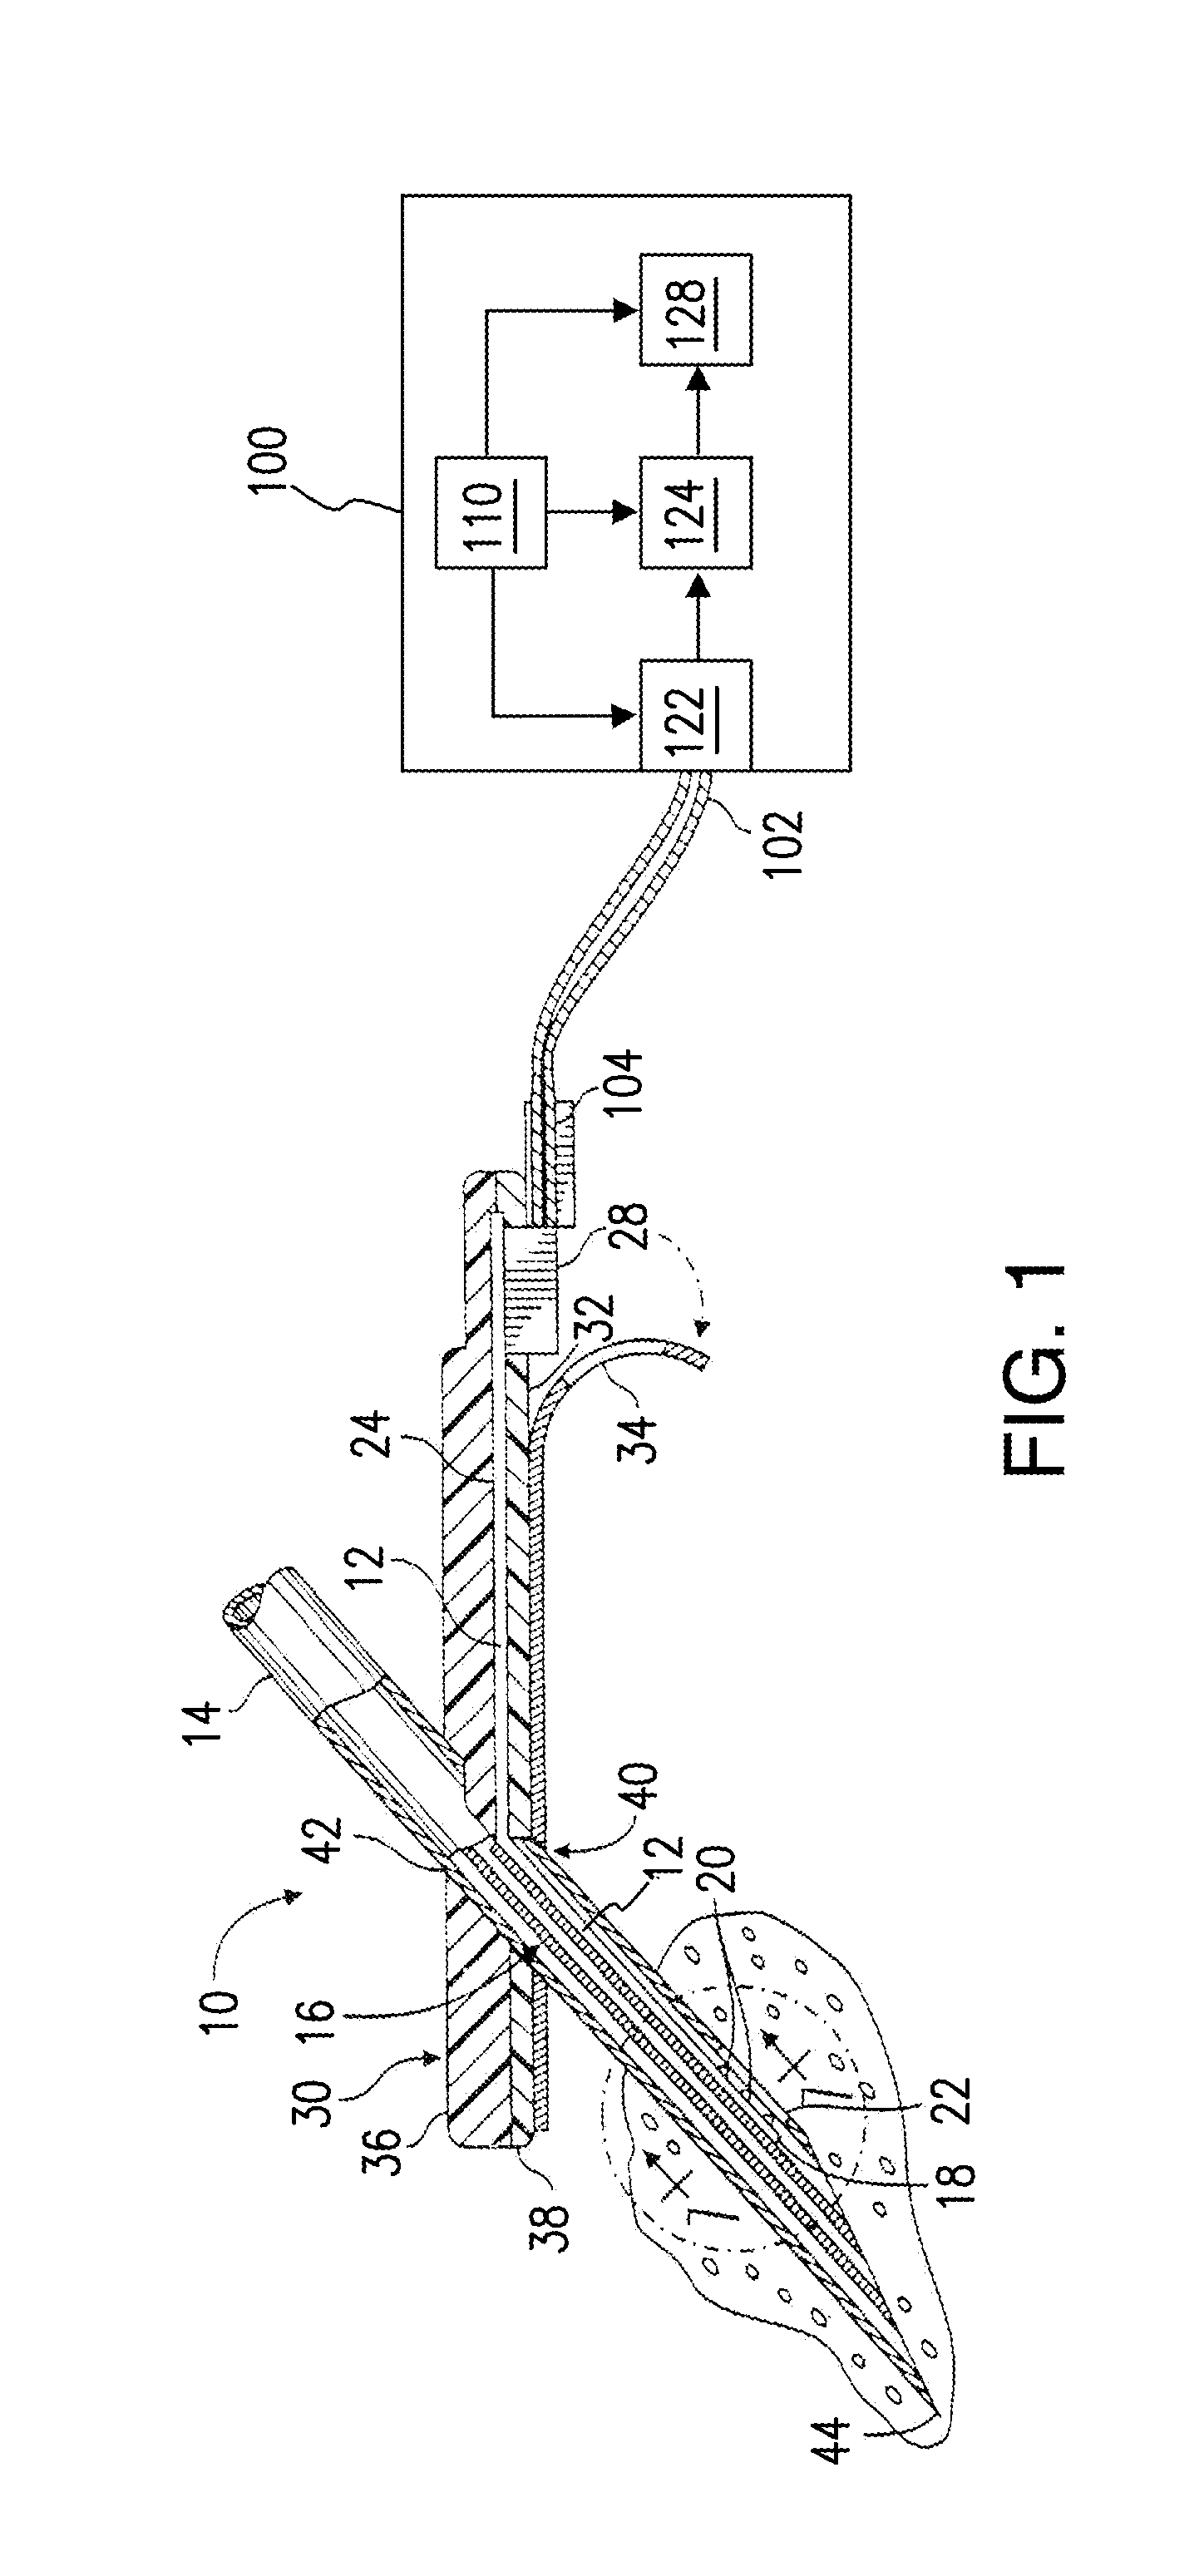 Application of electrochemical impedance spectroscopy in sensor systems, devices, and related methods